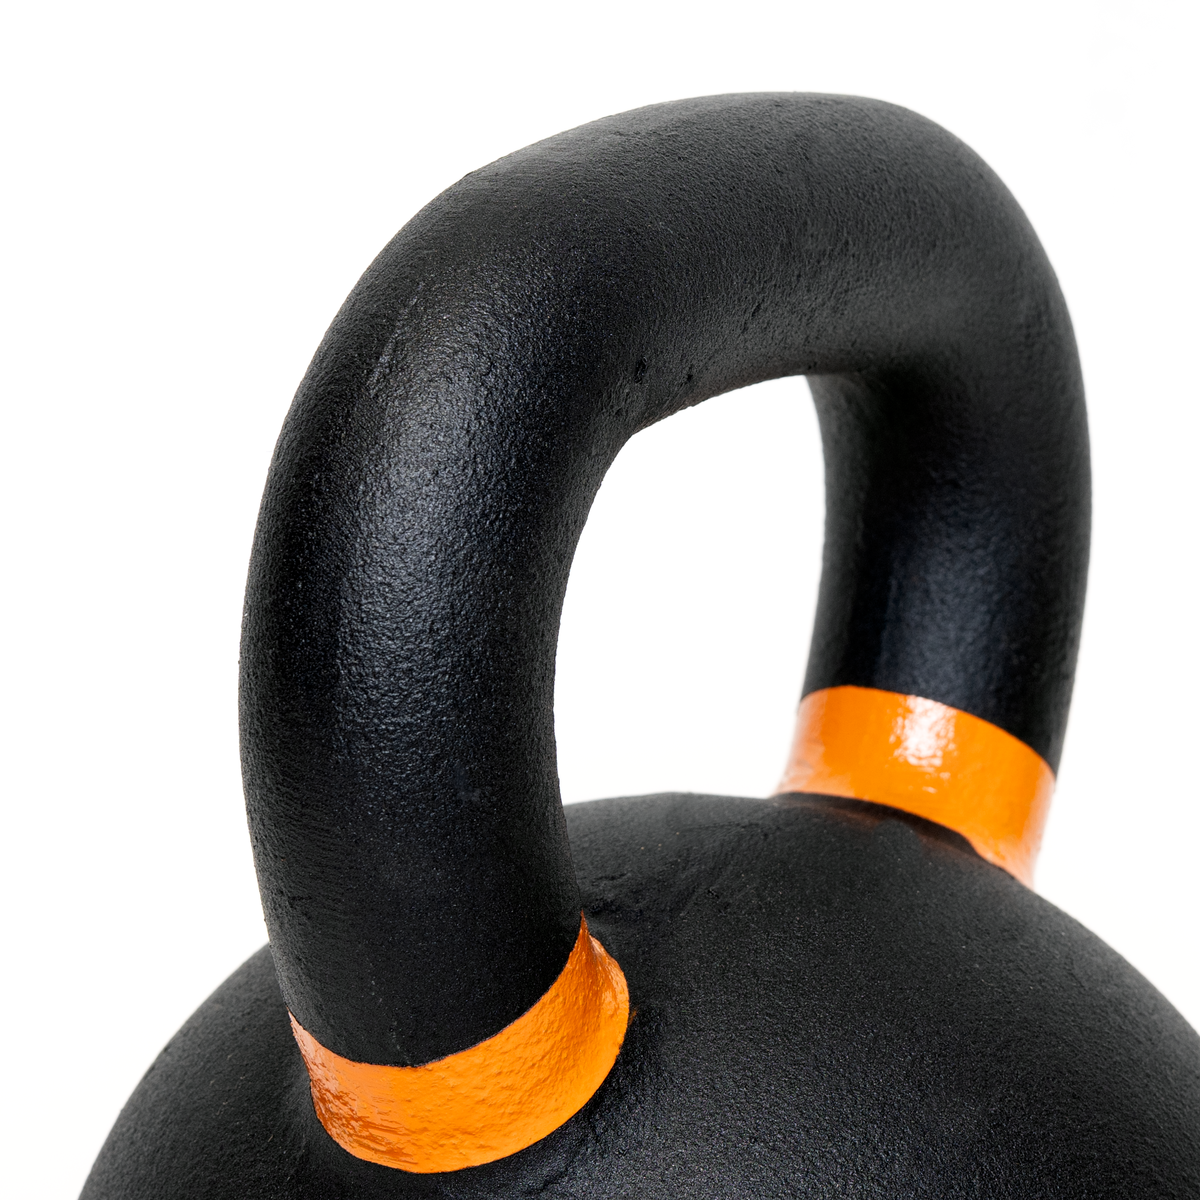 Fitway Cast Iron Kettlebell - 10lb 